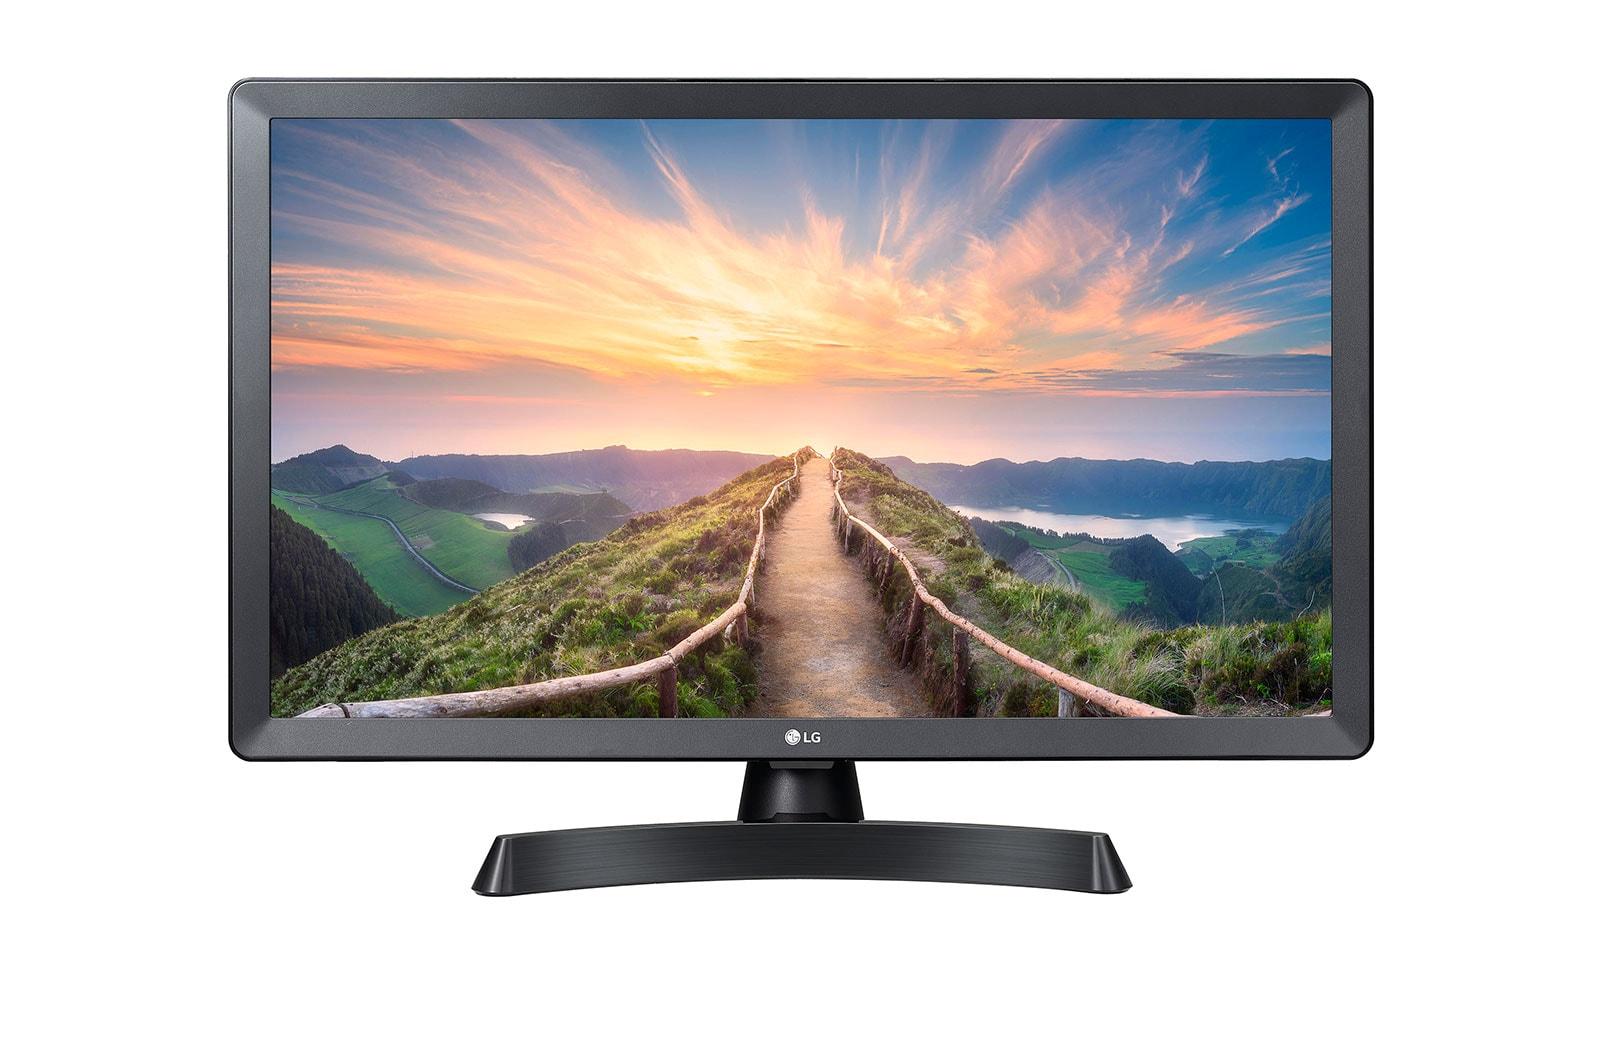 Lg 24" HD Smart TV with webOS 3.5